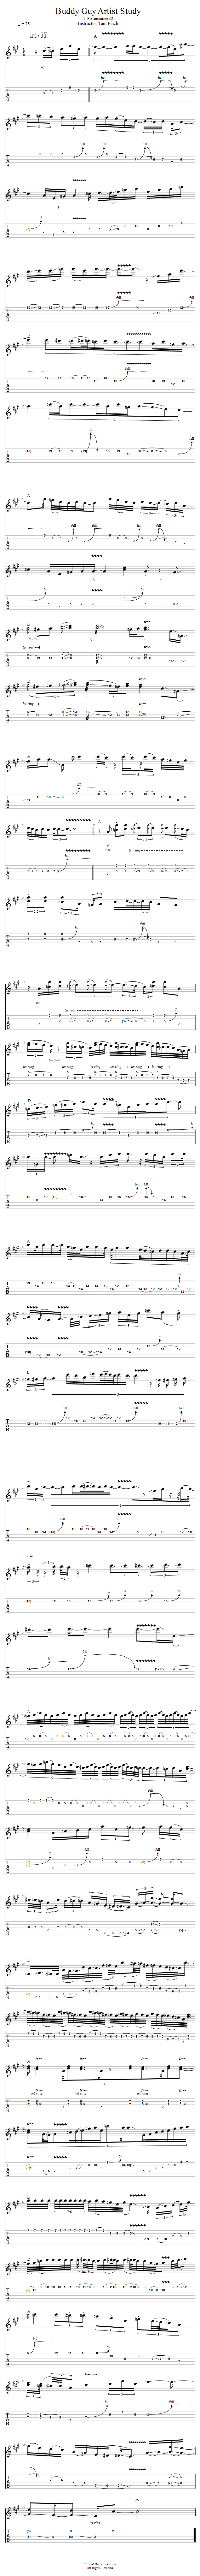 Buddy Guy Artist Study: Performance #2 song notation